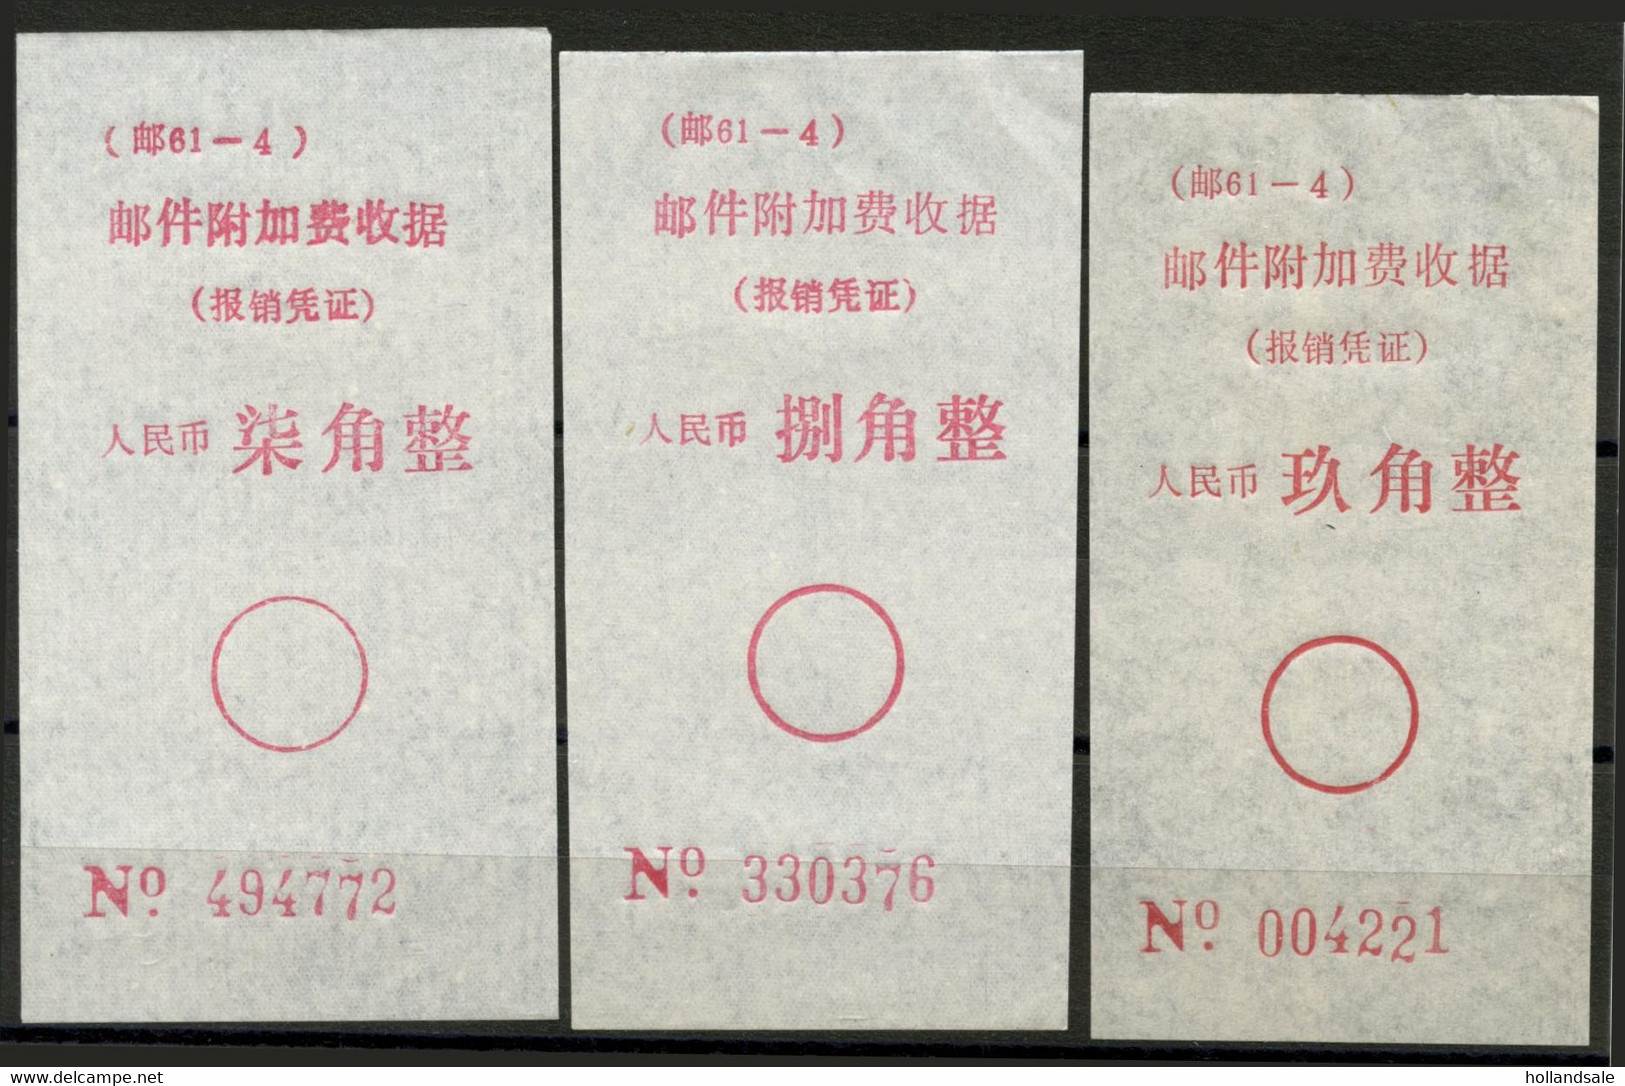 CHINA PRC - ADDED CHARGE LABELS -  70f - 90f Labels Of Huaying City, Sichuan Prov. D&O # 24-0555/24-0557. - Impuestos